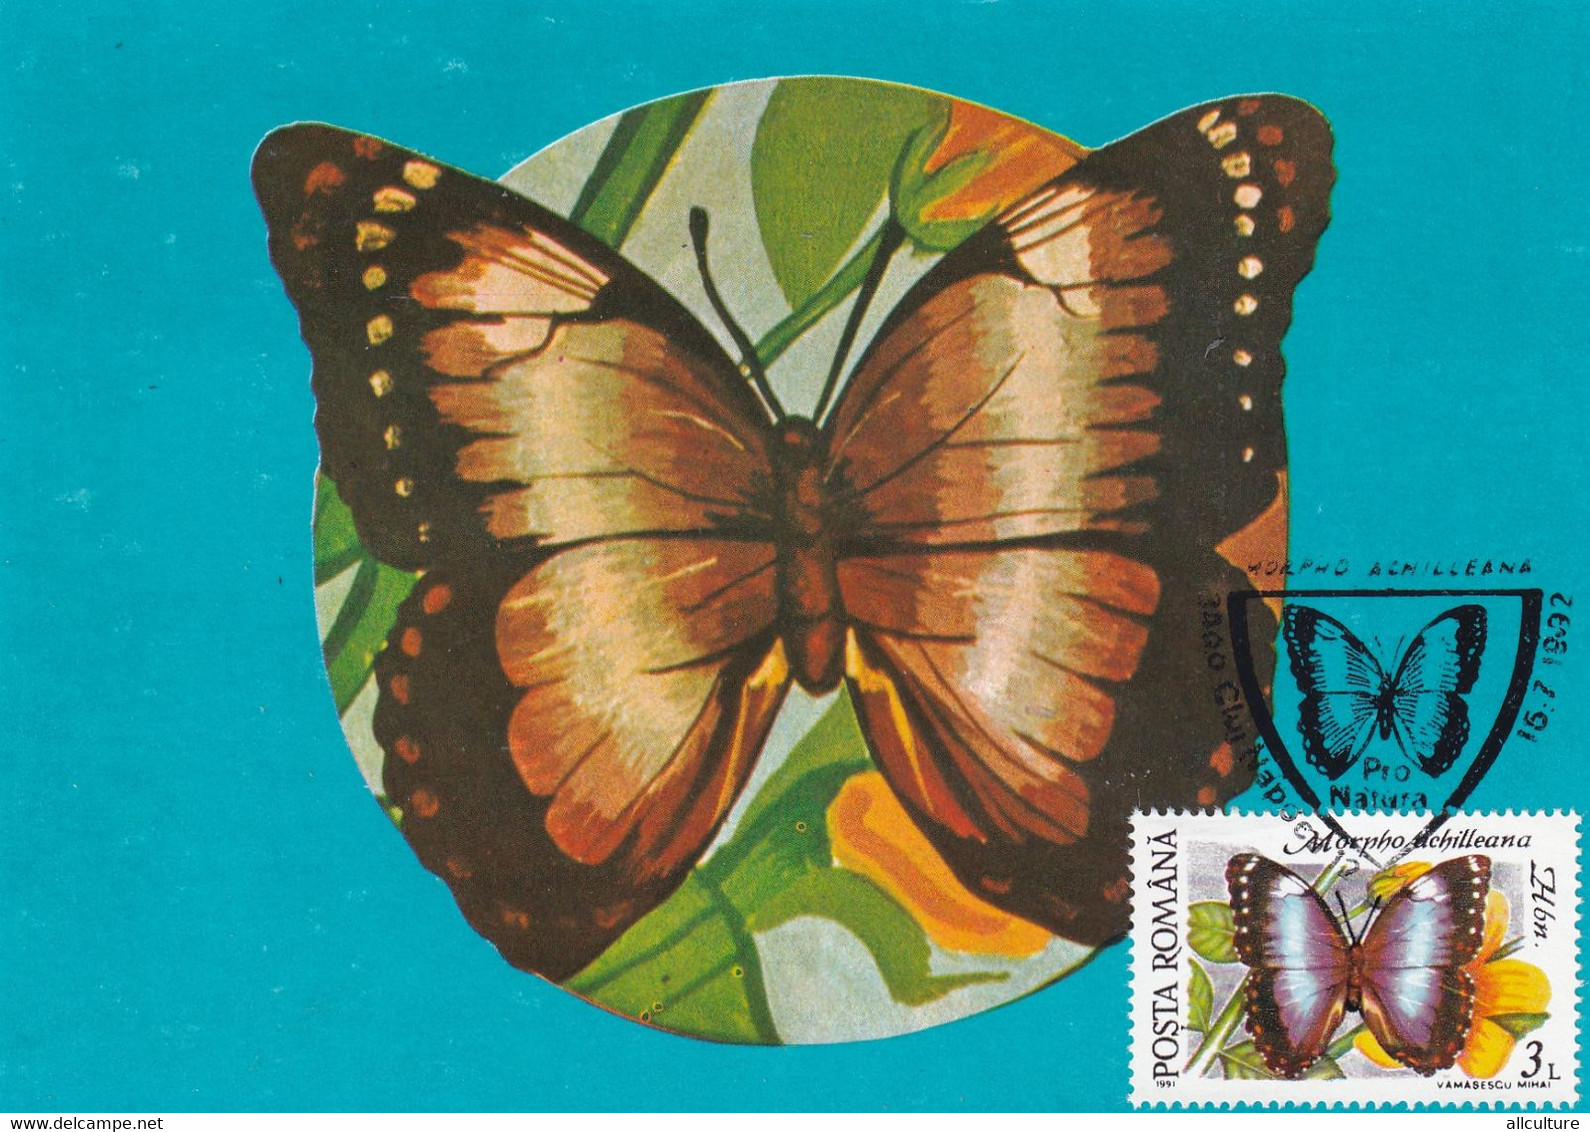 A9036- MORPHO ACHILLEANA BUTTERFLY, PRONATURE CLUJ NAPOCA 1992 ROMANIA, MAX CARD USED STAMP ON COVER POSTCARD - Vlinders